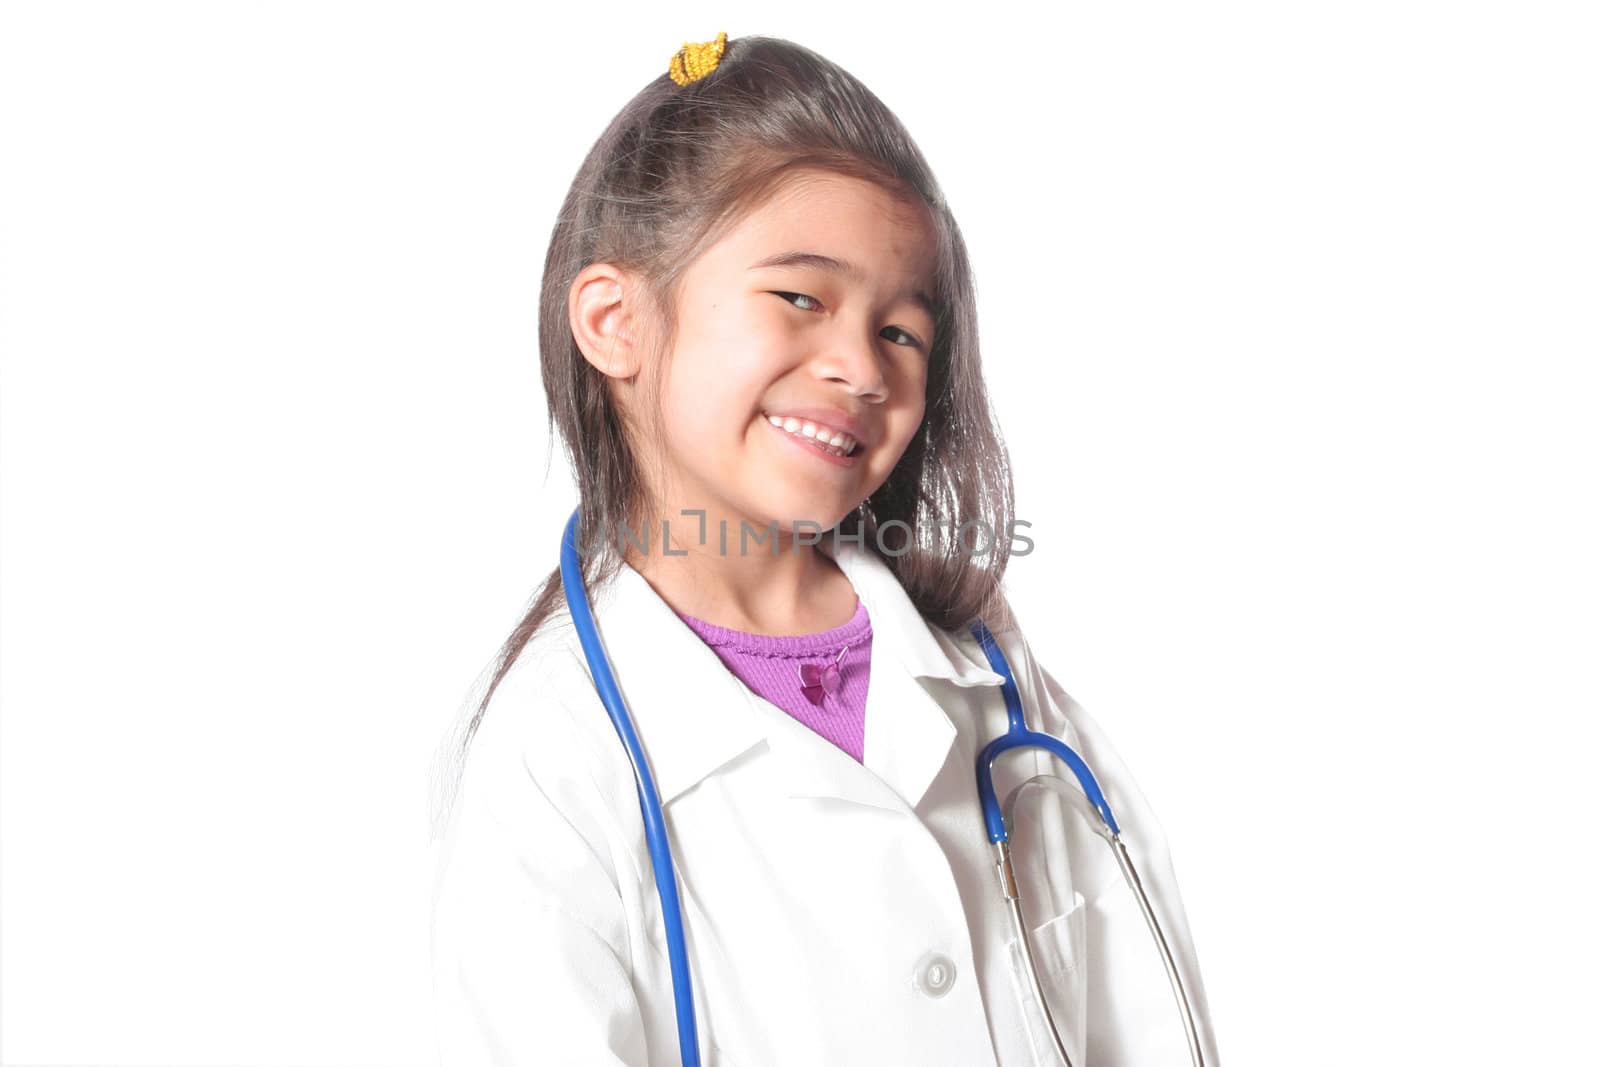 Adorable six year old in doctor's lab coat and stethoscope. part Asian, part Scandinavian descent.